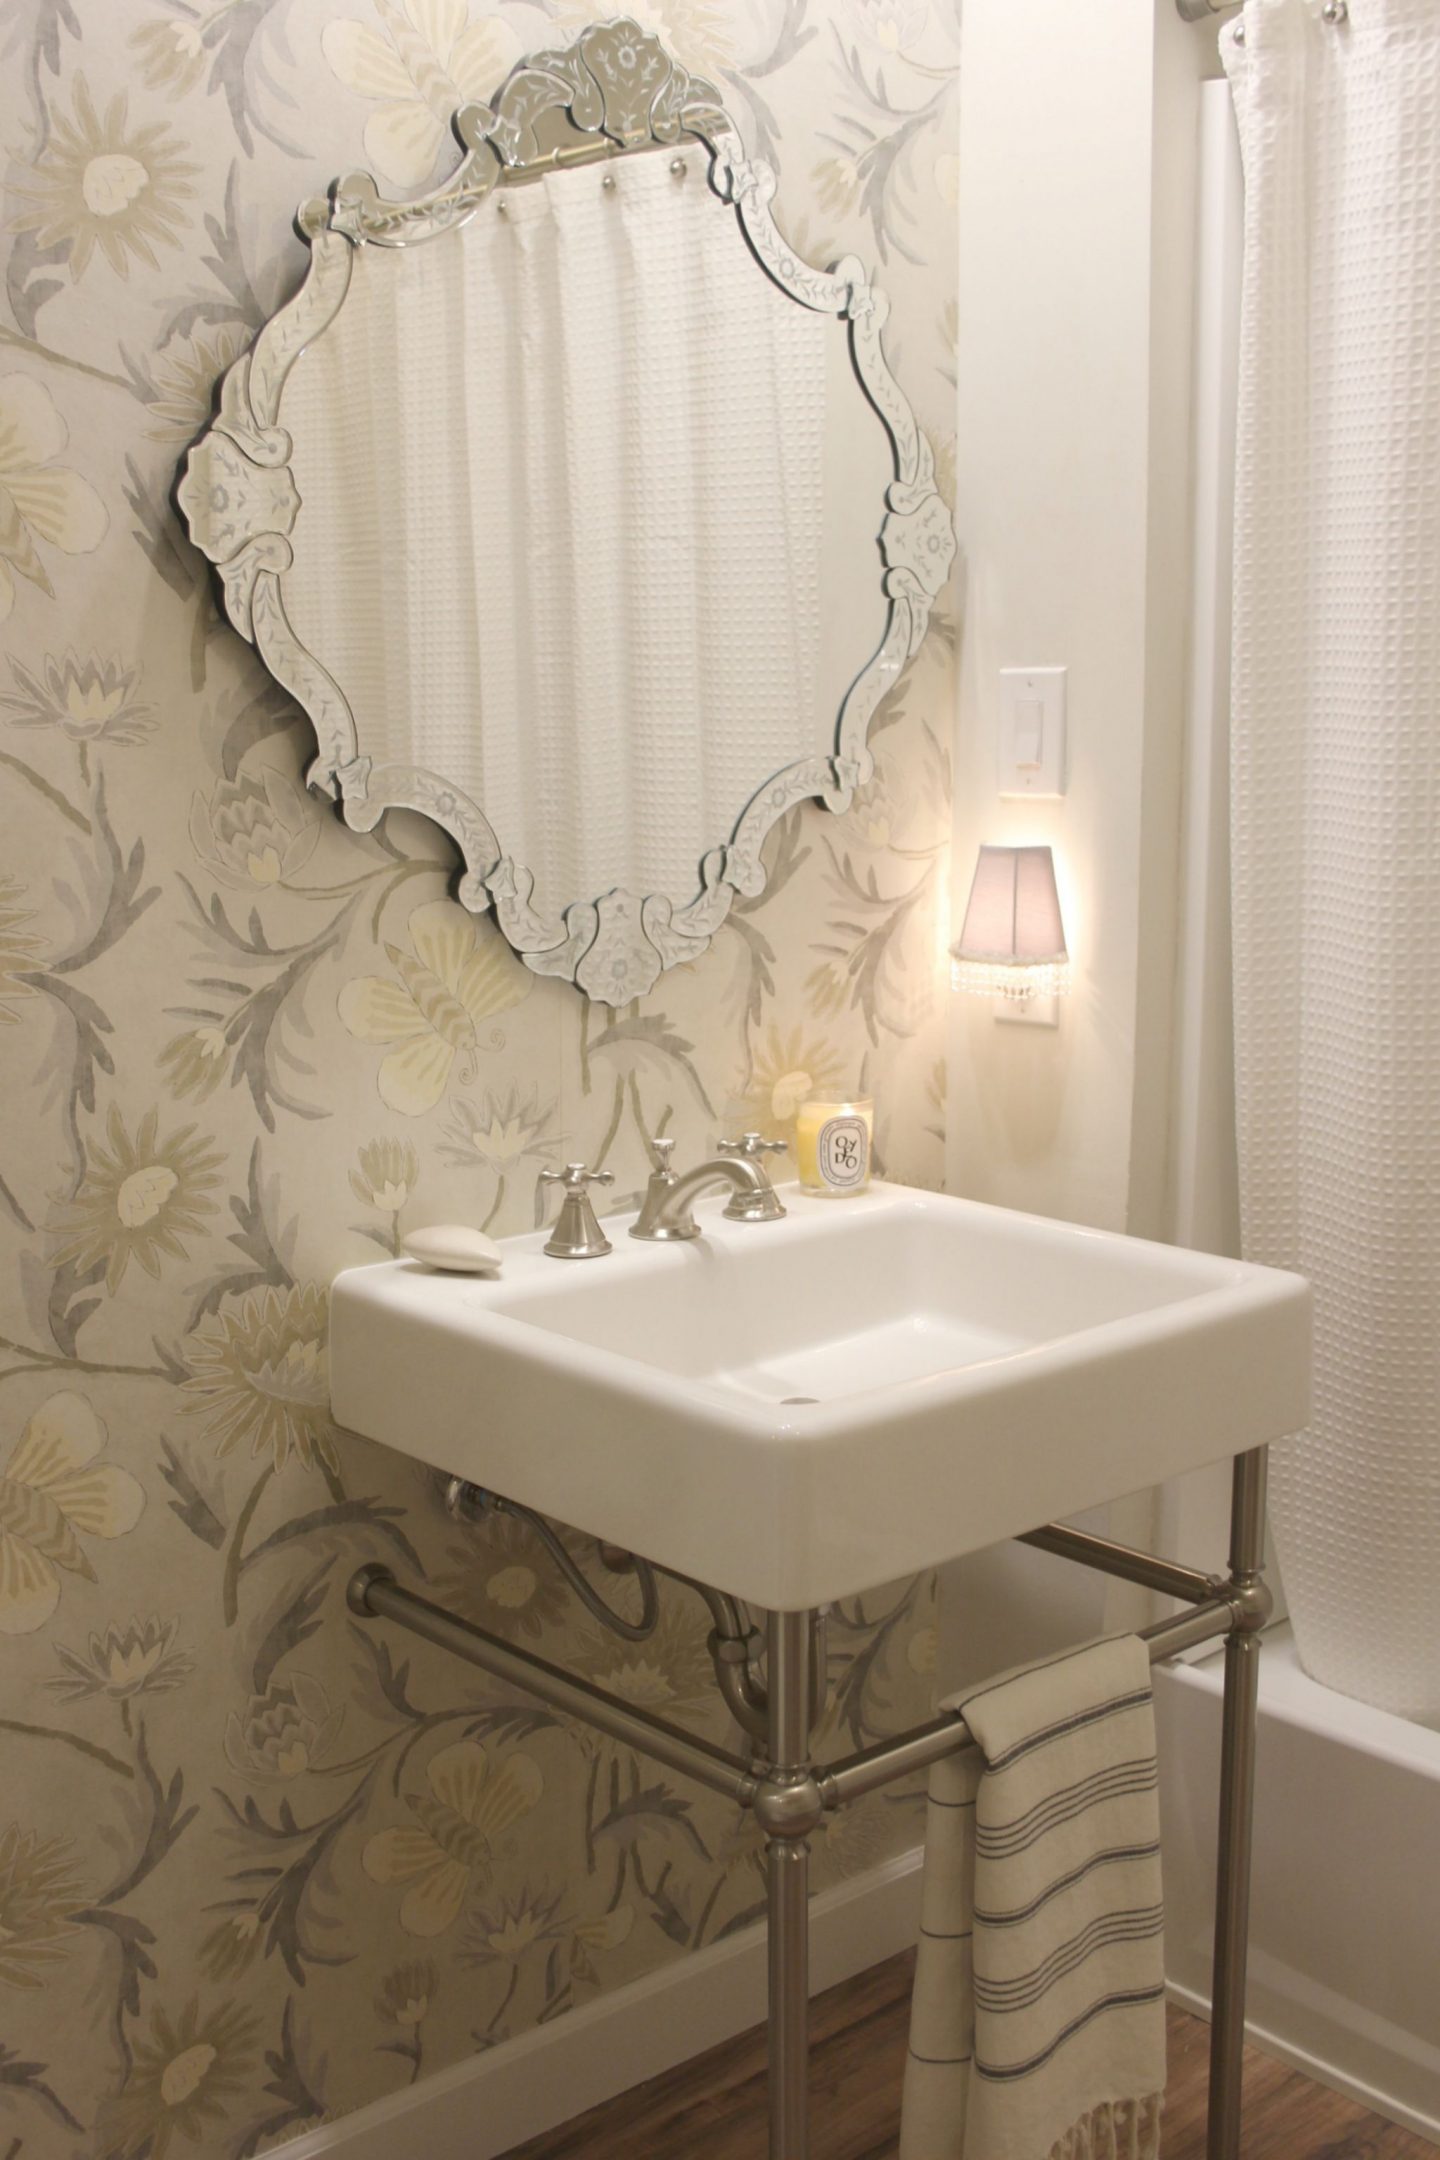 Classic white bathroom with console sink, Venetian mirror, Thibaut wallpaper (Lizette), and simple decor - Hello Lovely Studio.